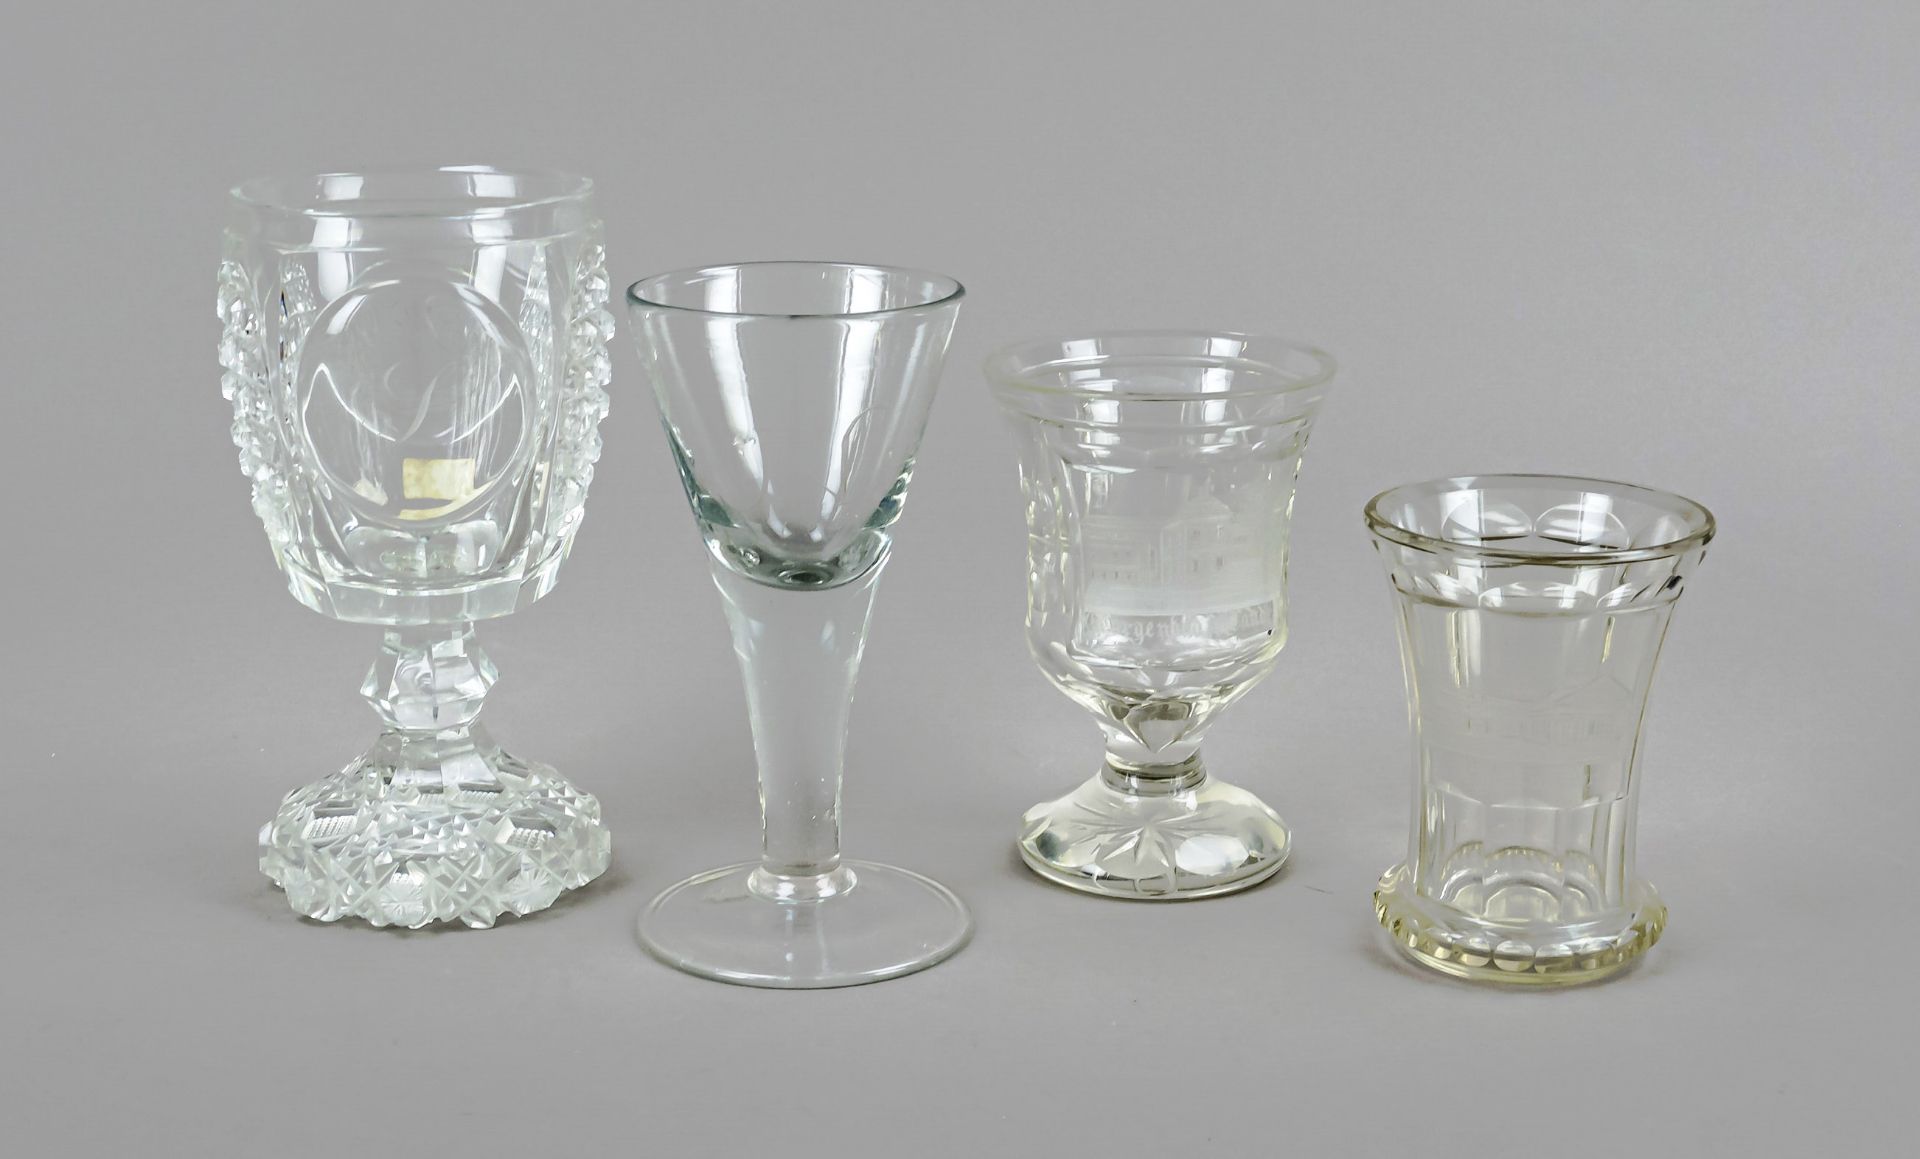 Four glasses, 19th/20th century, various shapes and sizes, 1 watchman, 2 footed glasses and 1